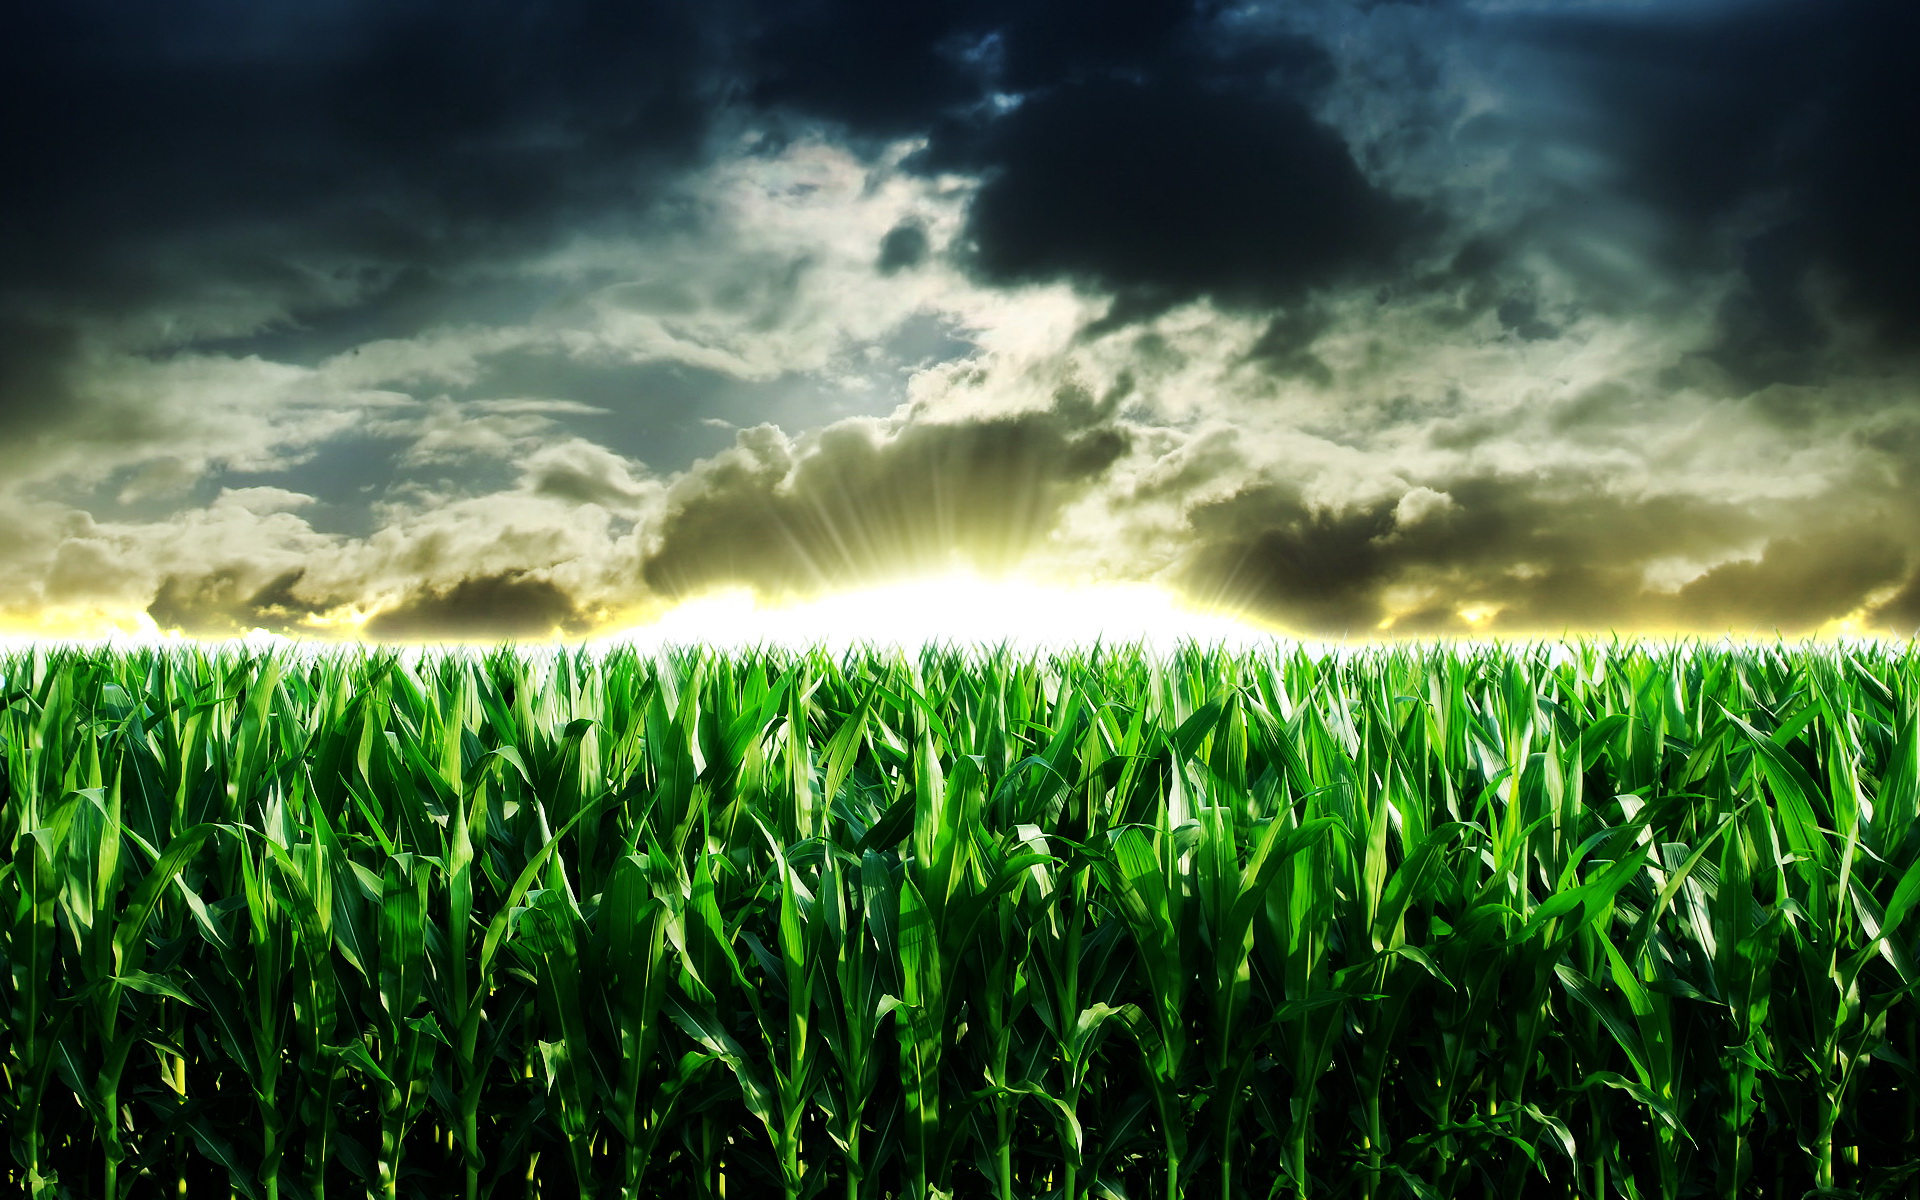 SKY ENGINE AI announces new synthetic data cloud win from major European agriculture manufacturer